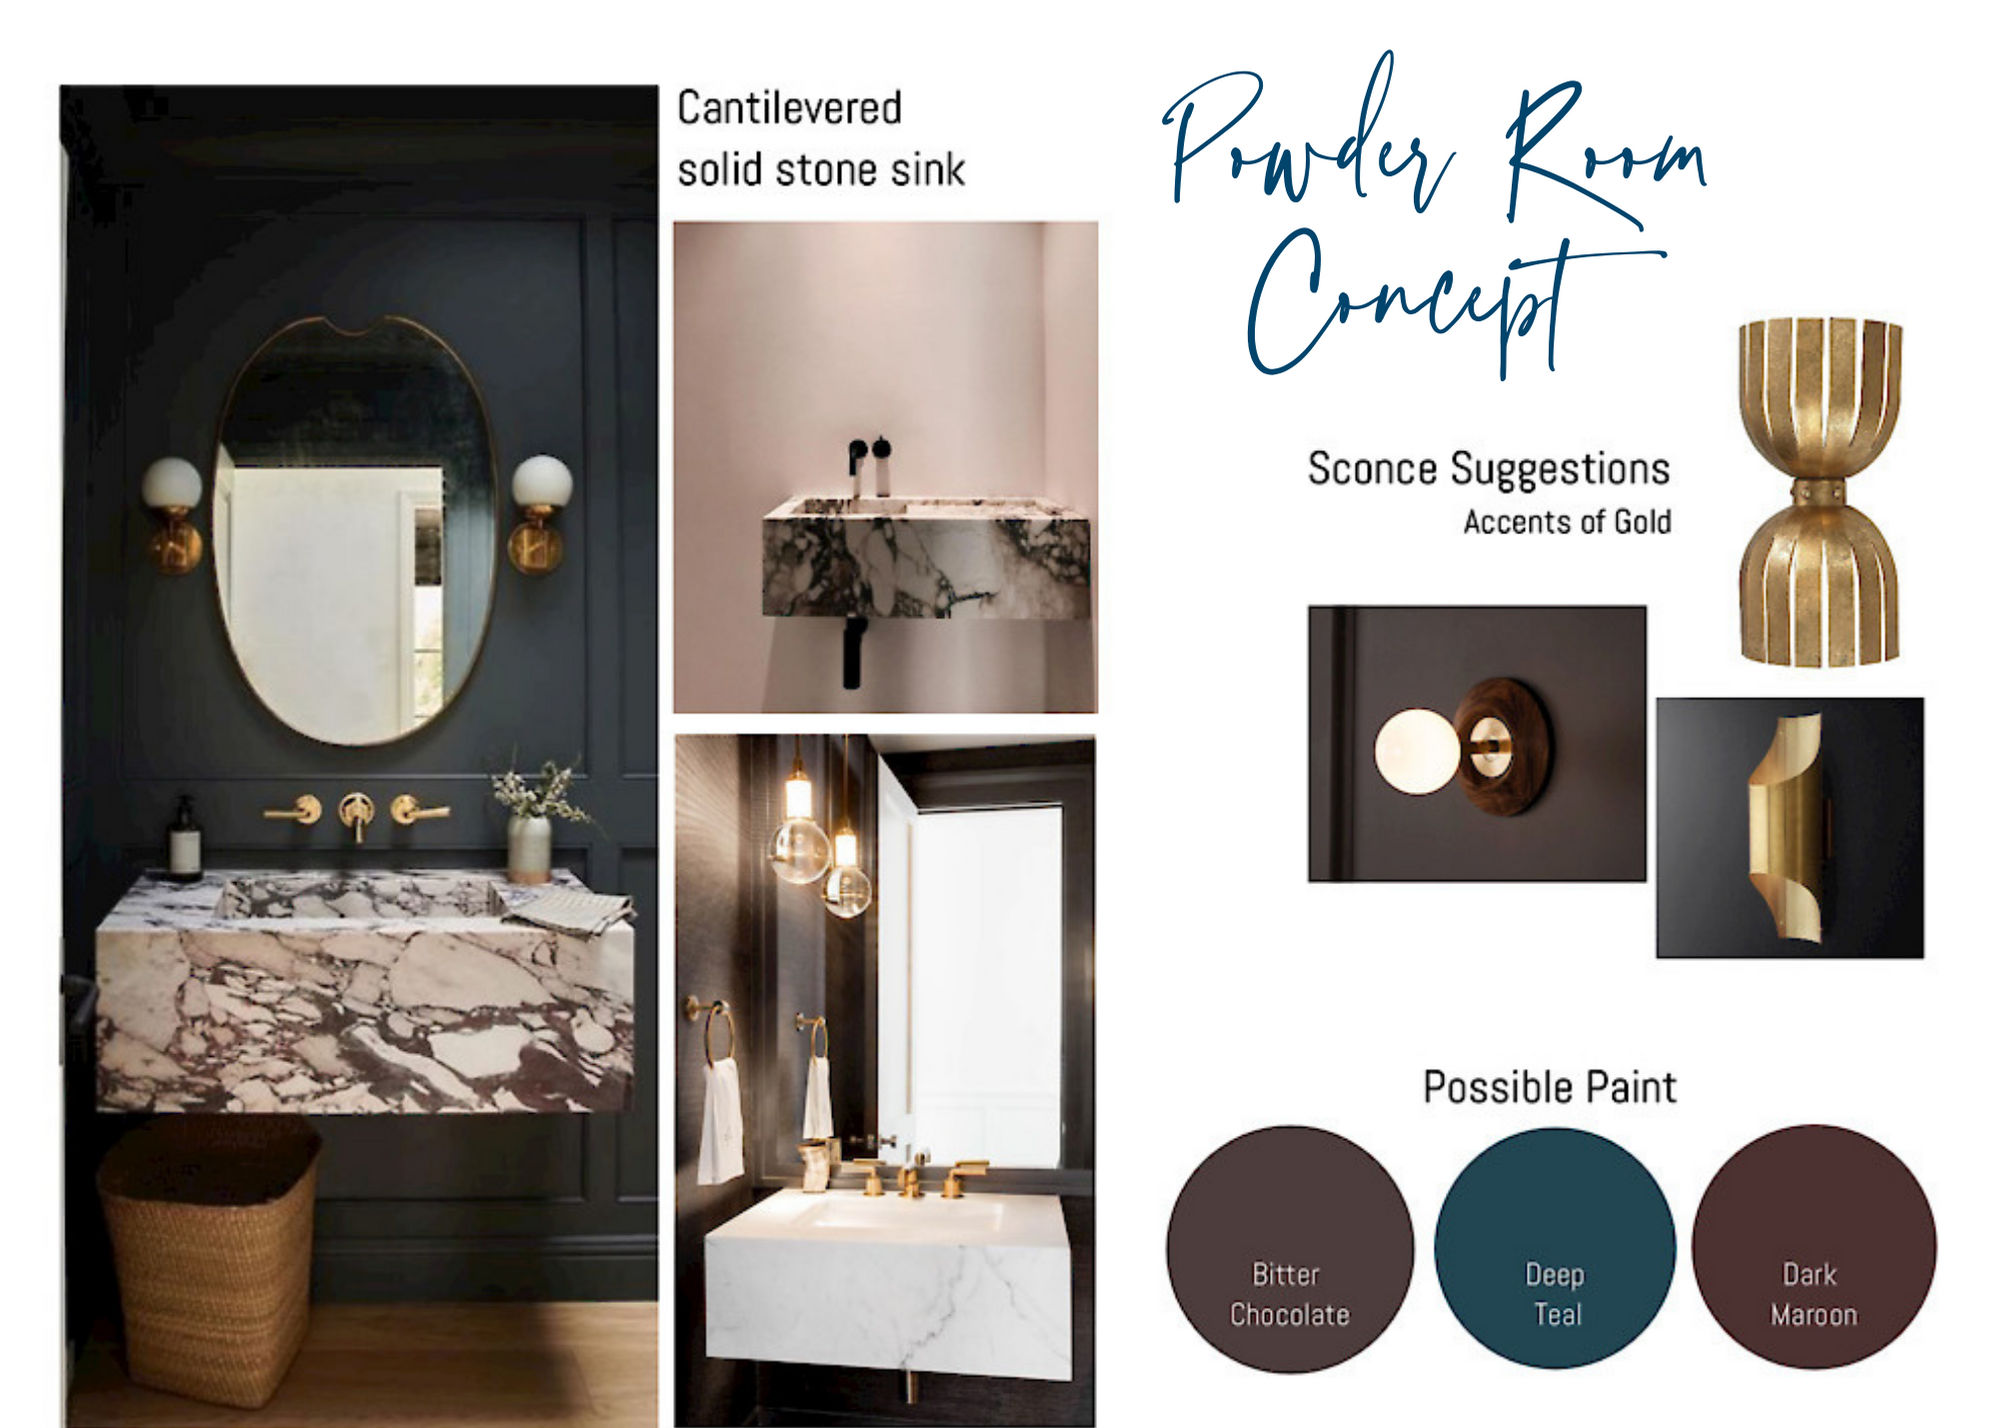 Powder room mood board and concept